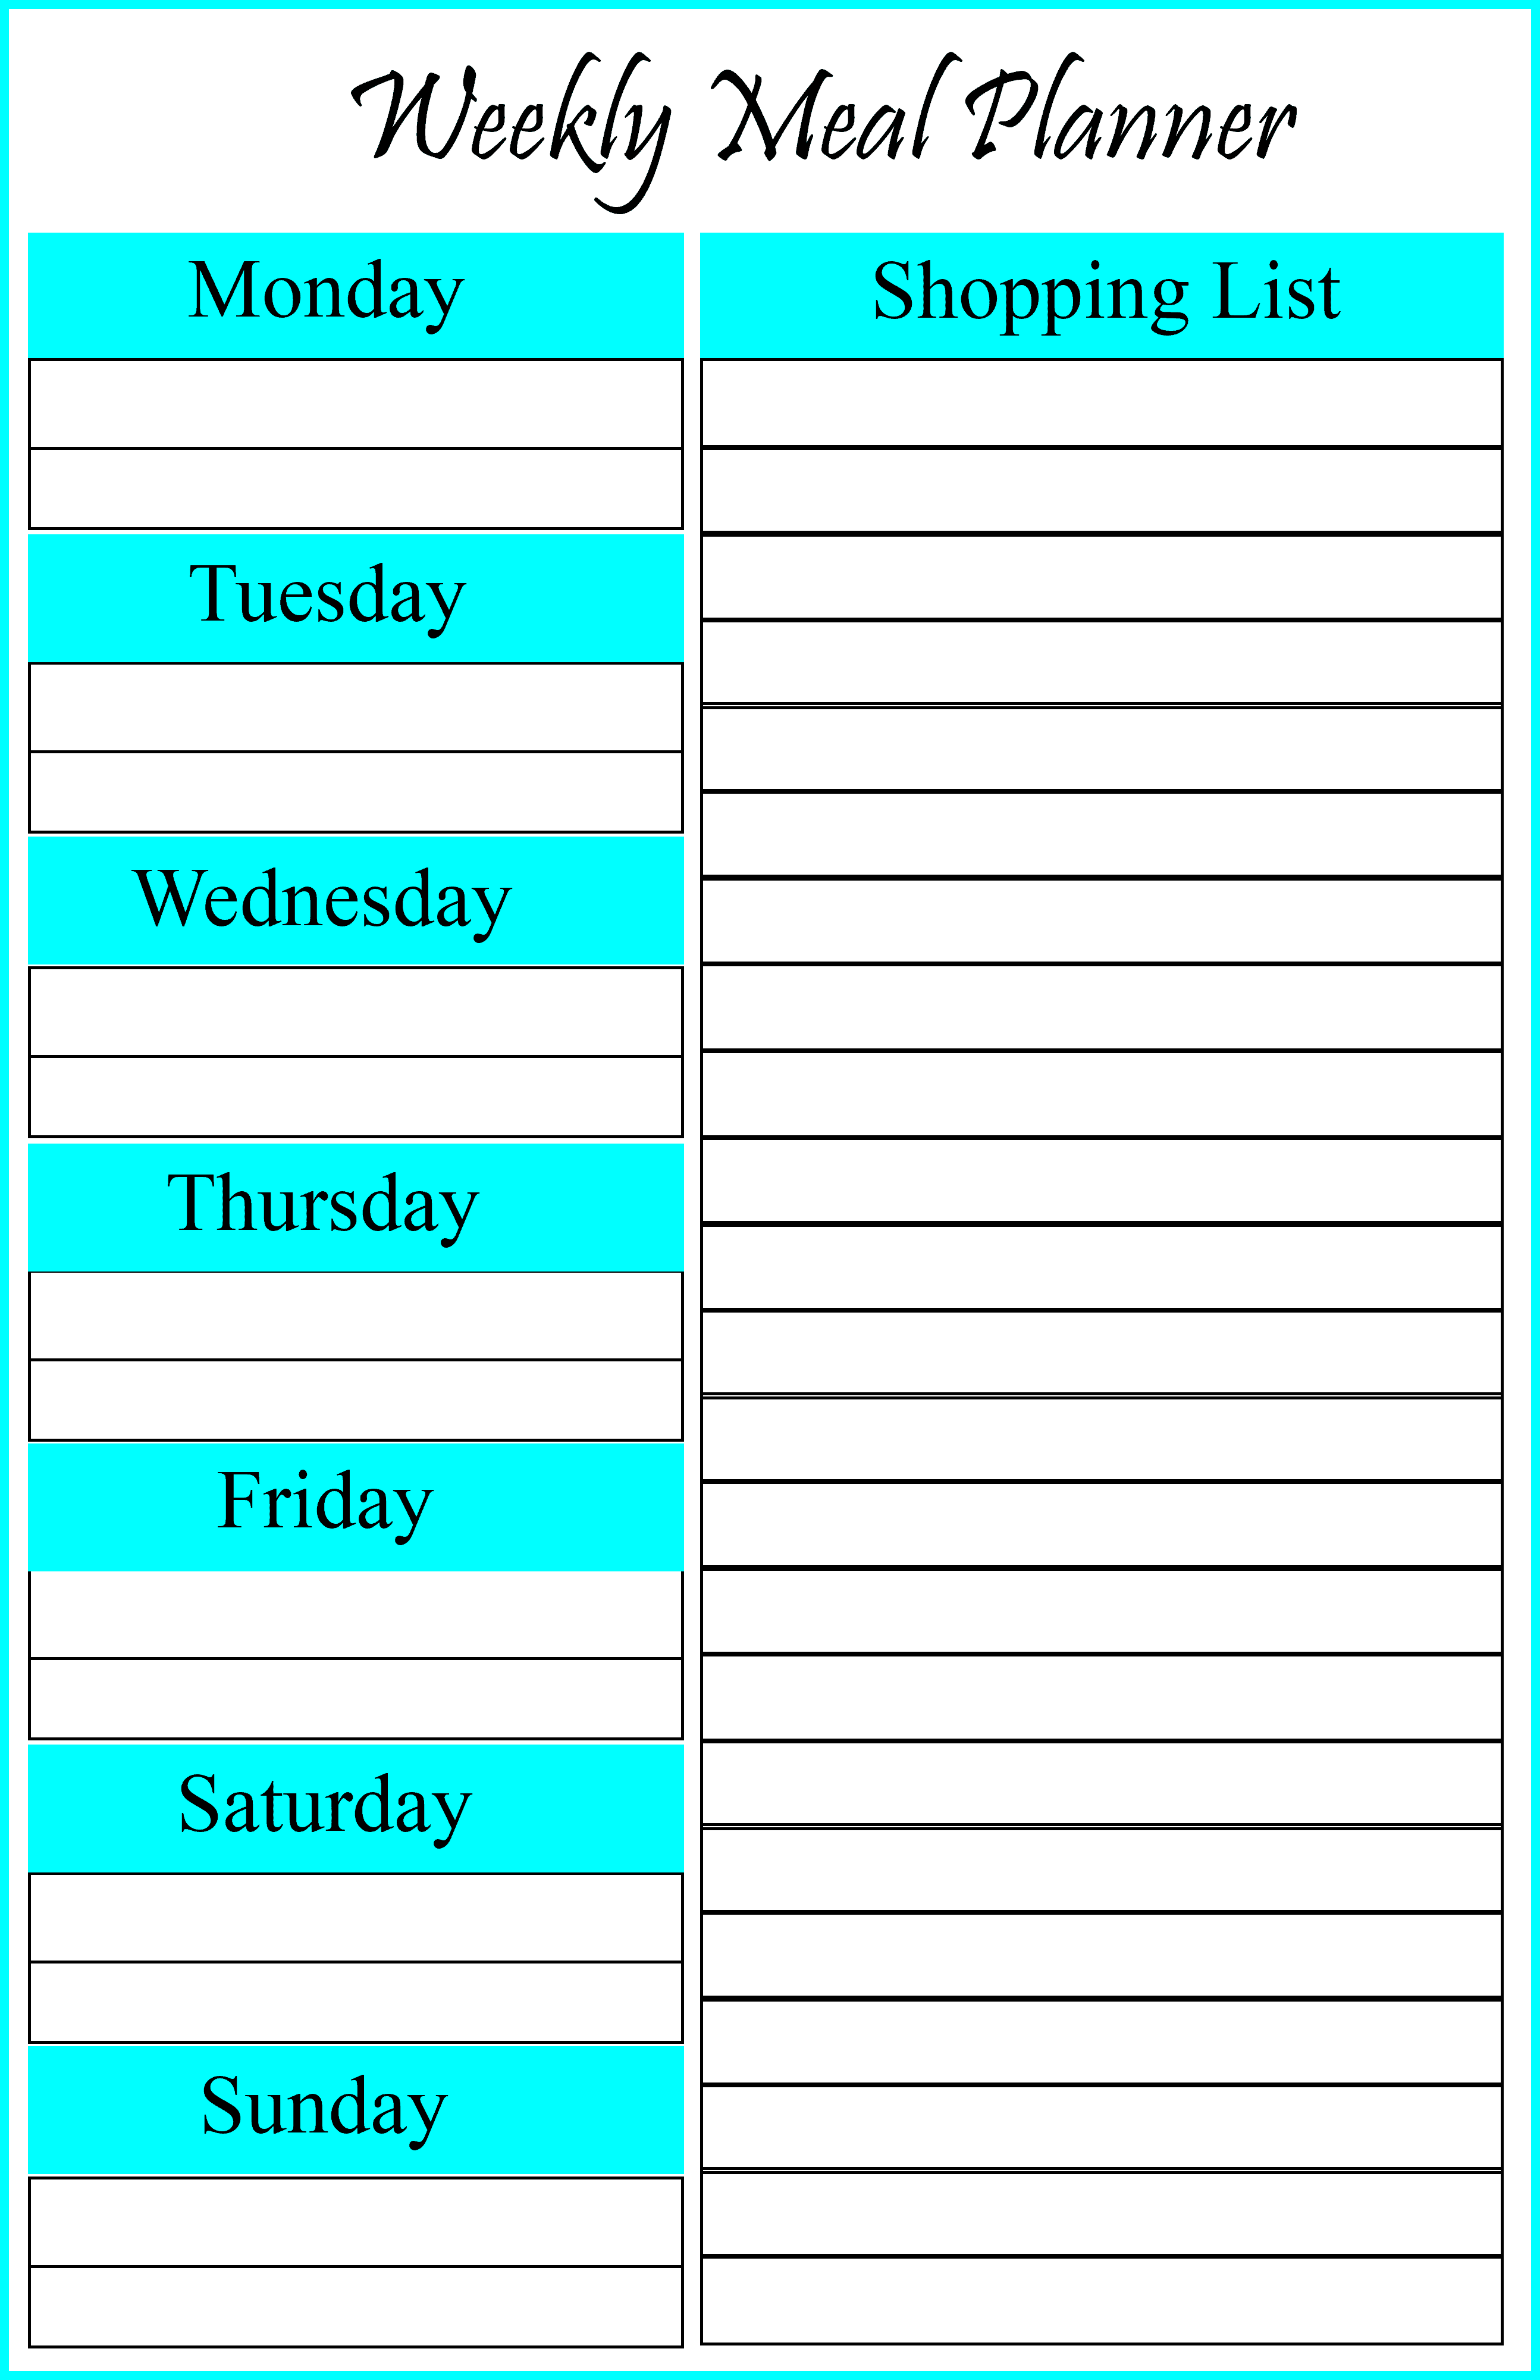 weekly-meal-planner-for-a-family-of-4-best-letter-templates-riset